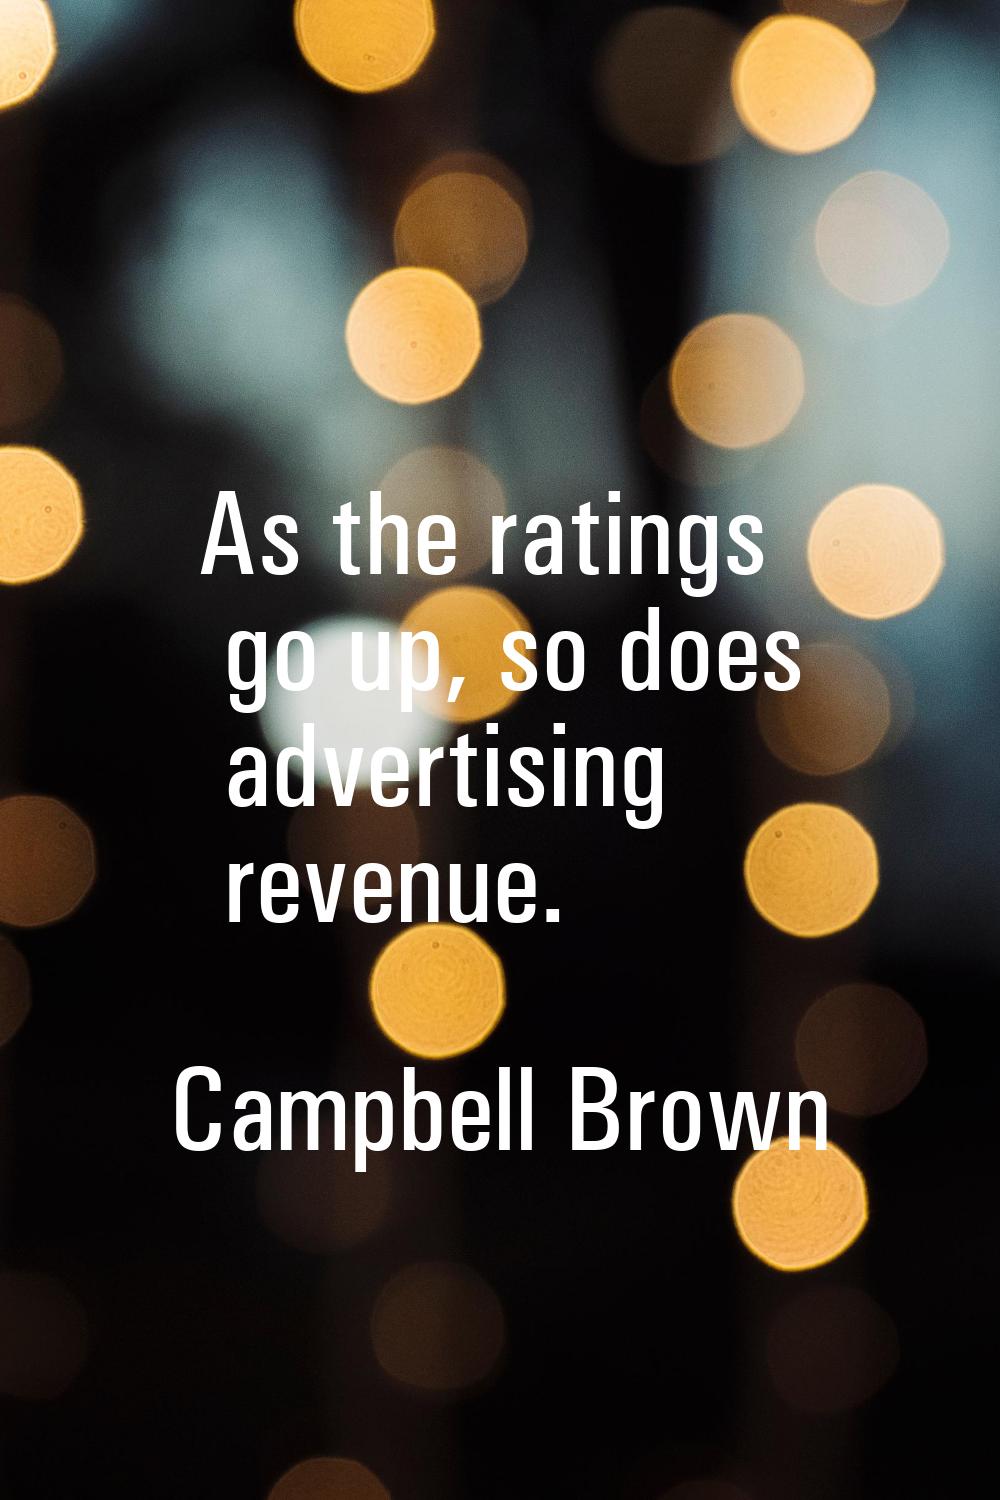 As the ratings go up, so does advertising revenue.